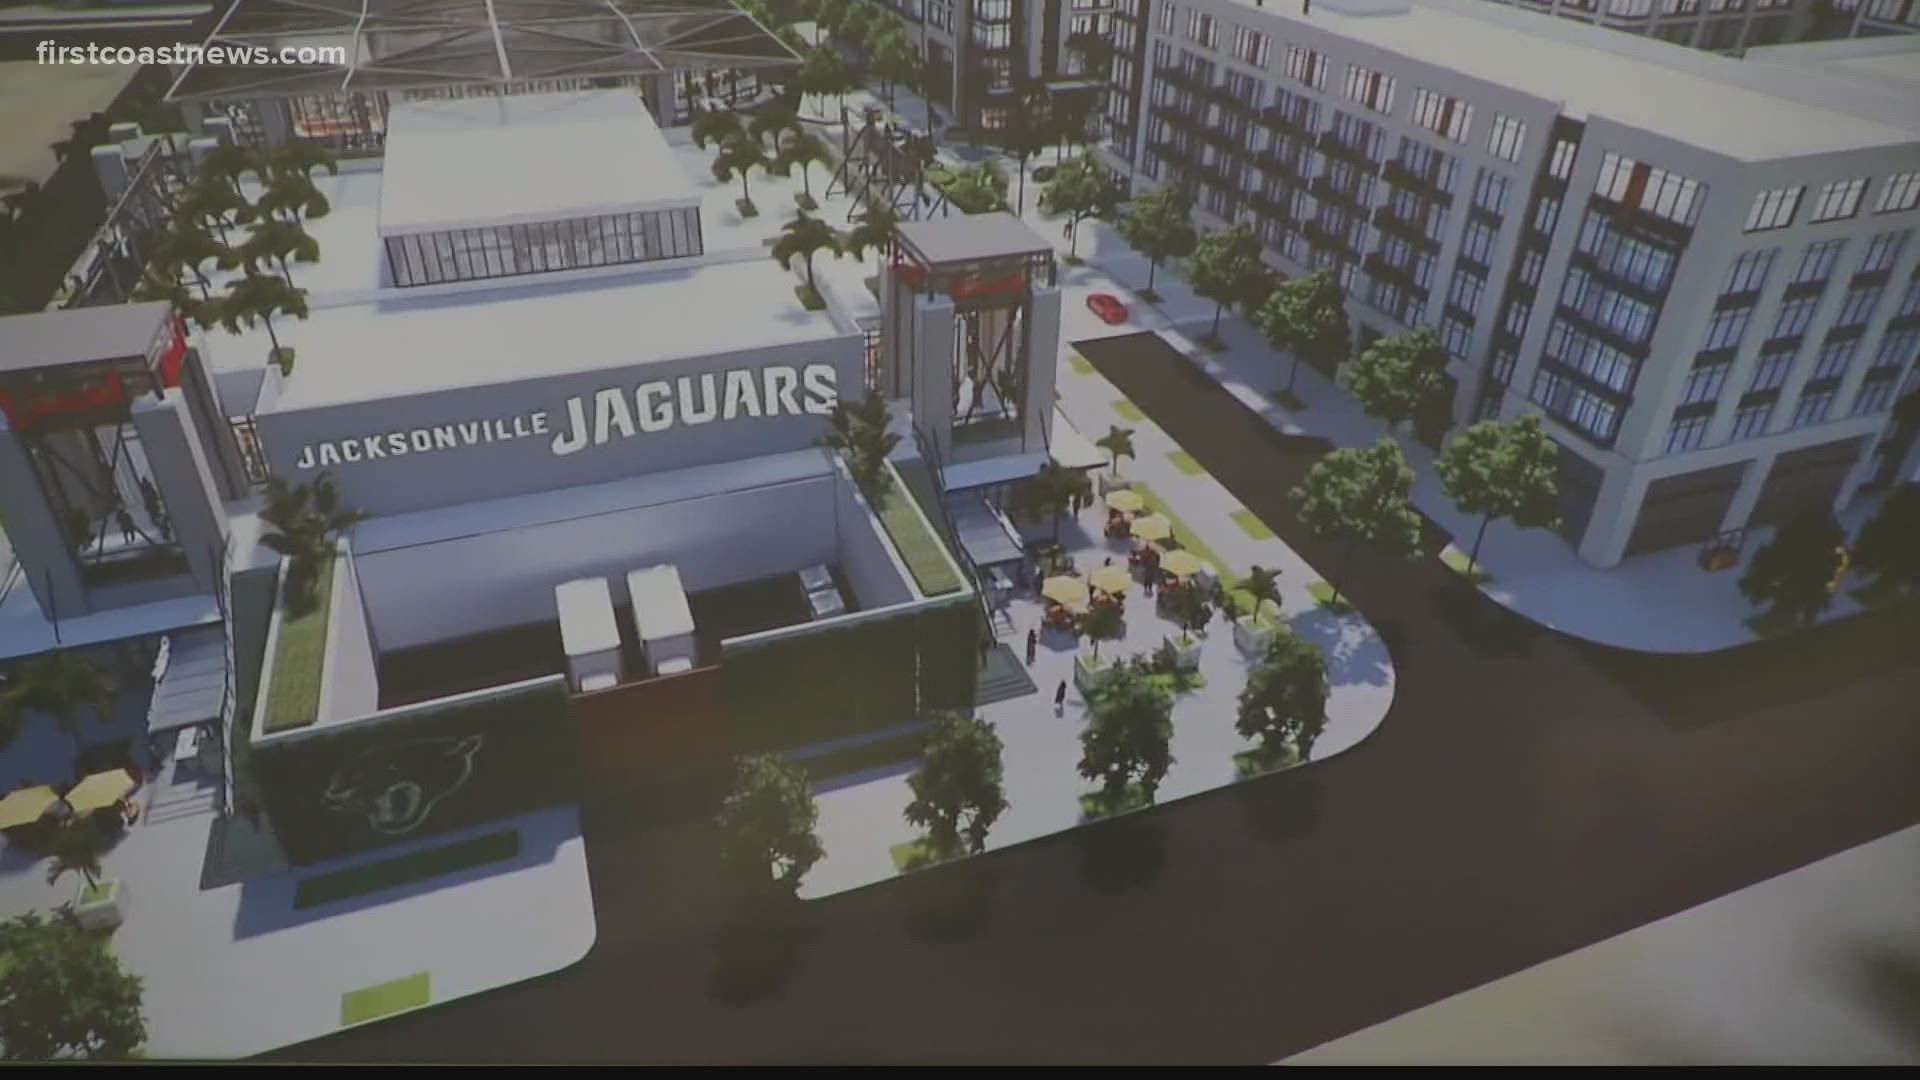 Councilman Garret Dennis said it is imperative for the city to ensure the Jaguars will remain in Jacksonville before investing in Lot J.